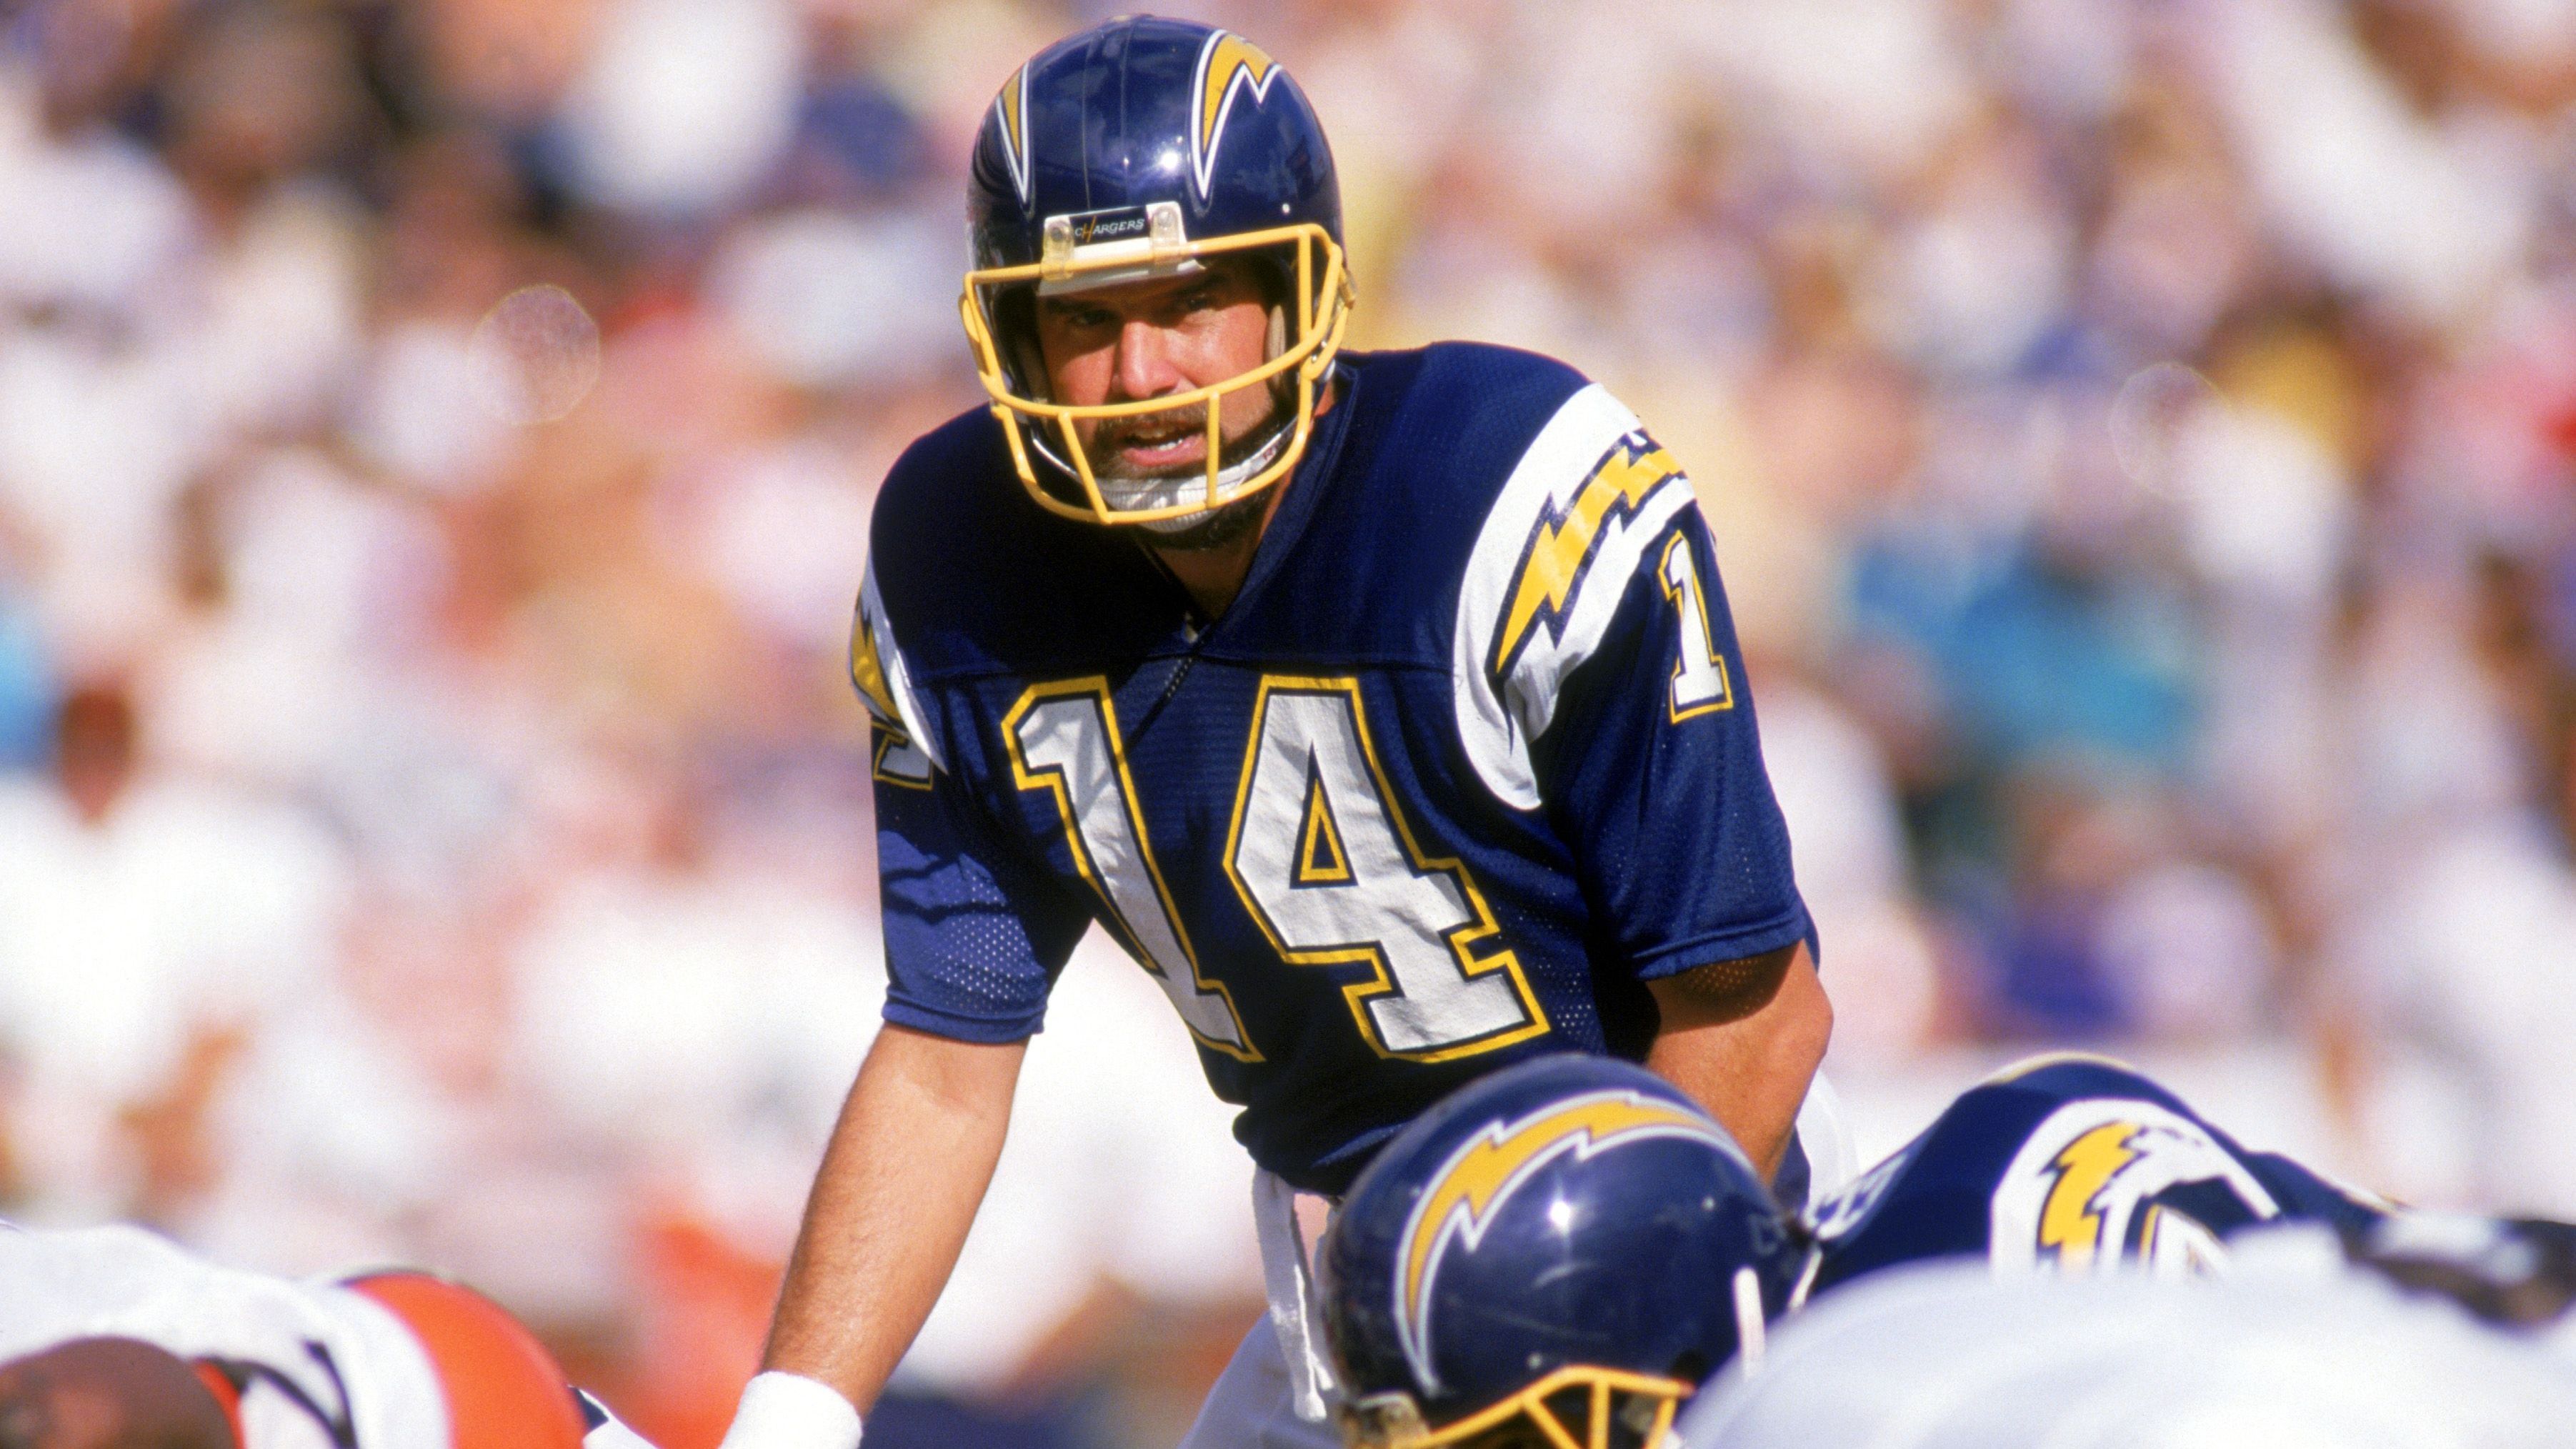 <strong>14: Dan Fouts</strong><br>Team: San Diego Chargers<br>Position: Quarterback<br>Erfolge: Pro Football Hall of Famer,&nbsp;NFL MVP 1982,&nbsp;sechsmaliger Pro Bowler<br>Honorable Mention: Don Hutson, Stefon Diggs